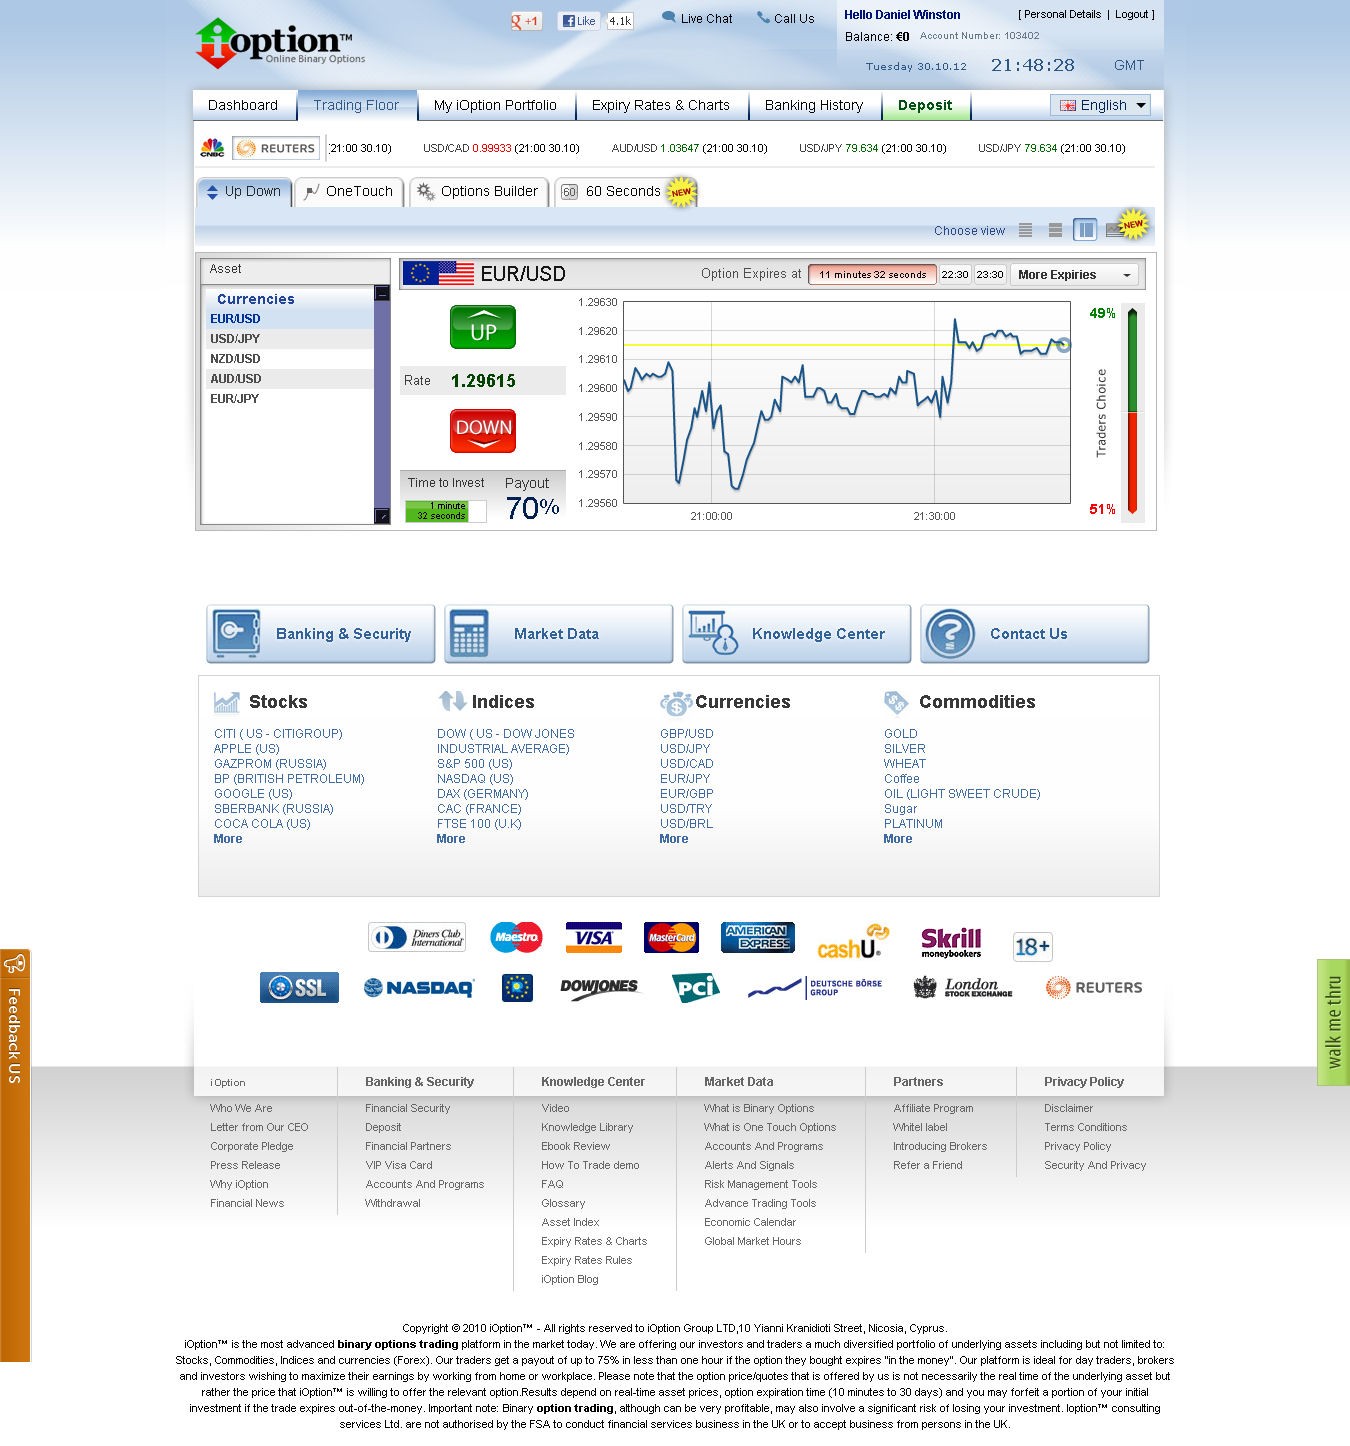 Online broker that offers binary options trading